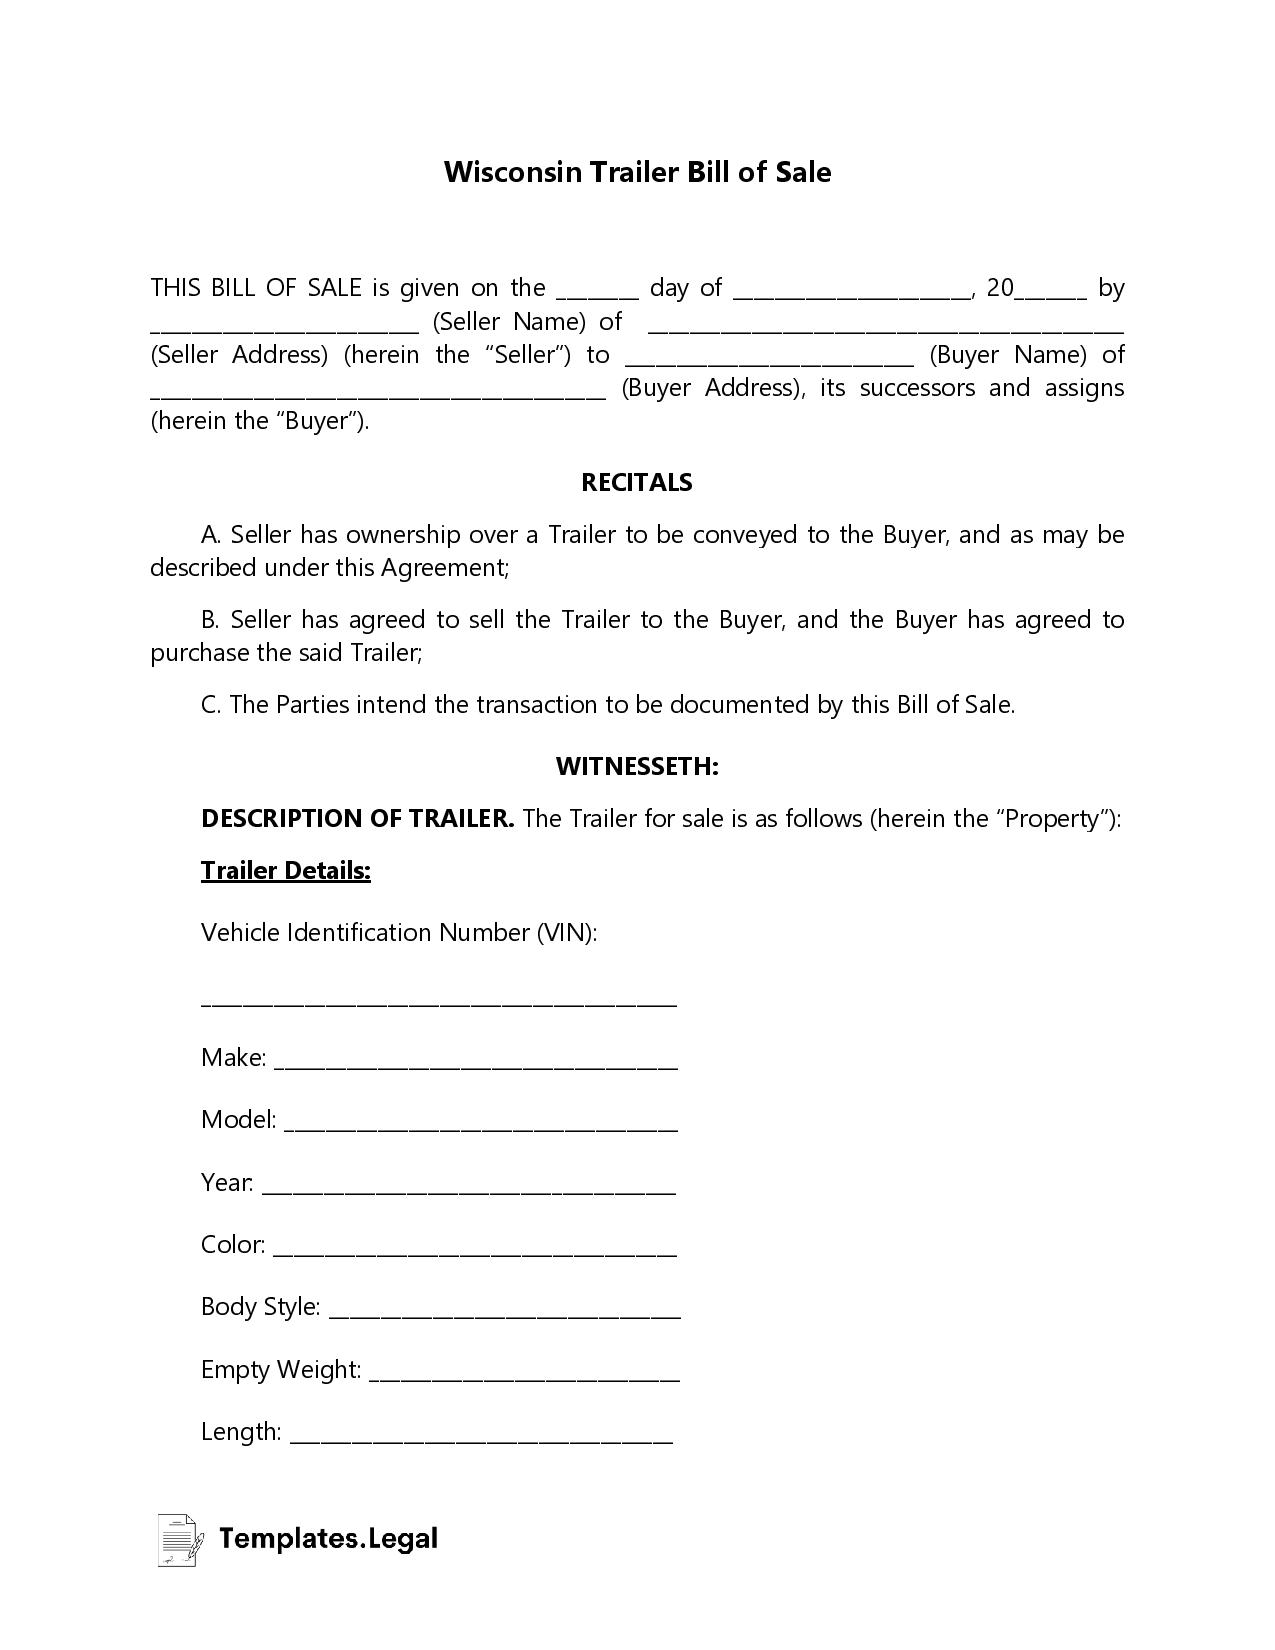 Wisconsin Trailer Bill of Sale - Templates.Legal